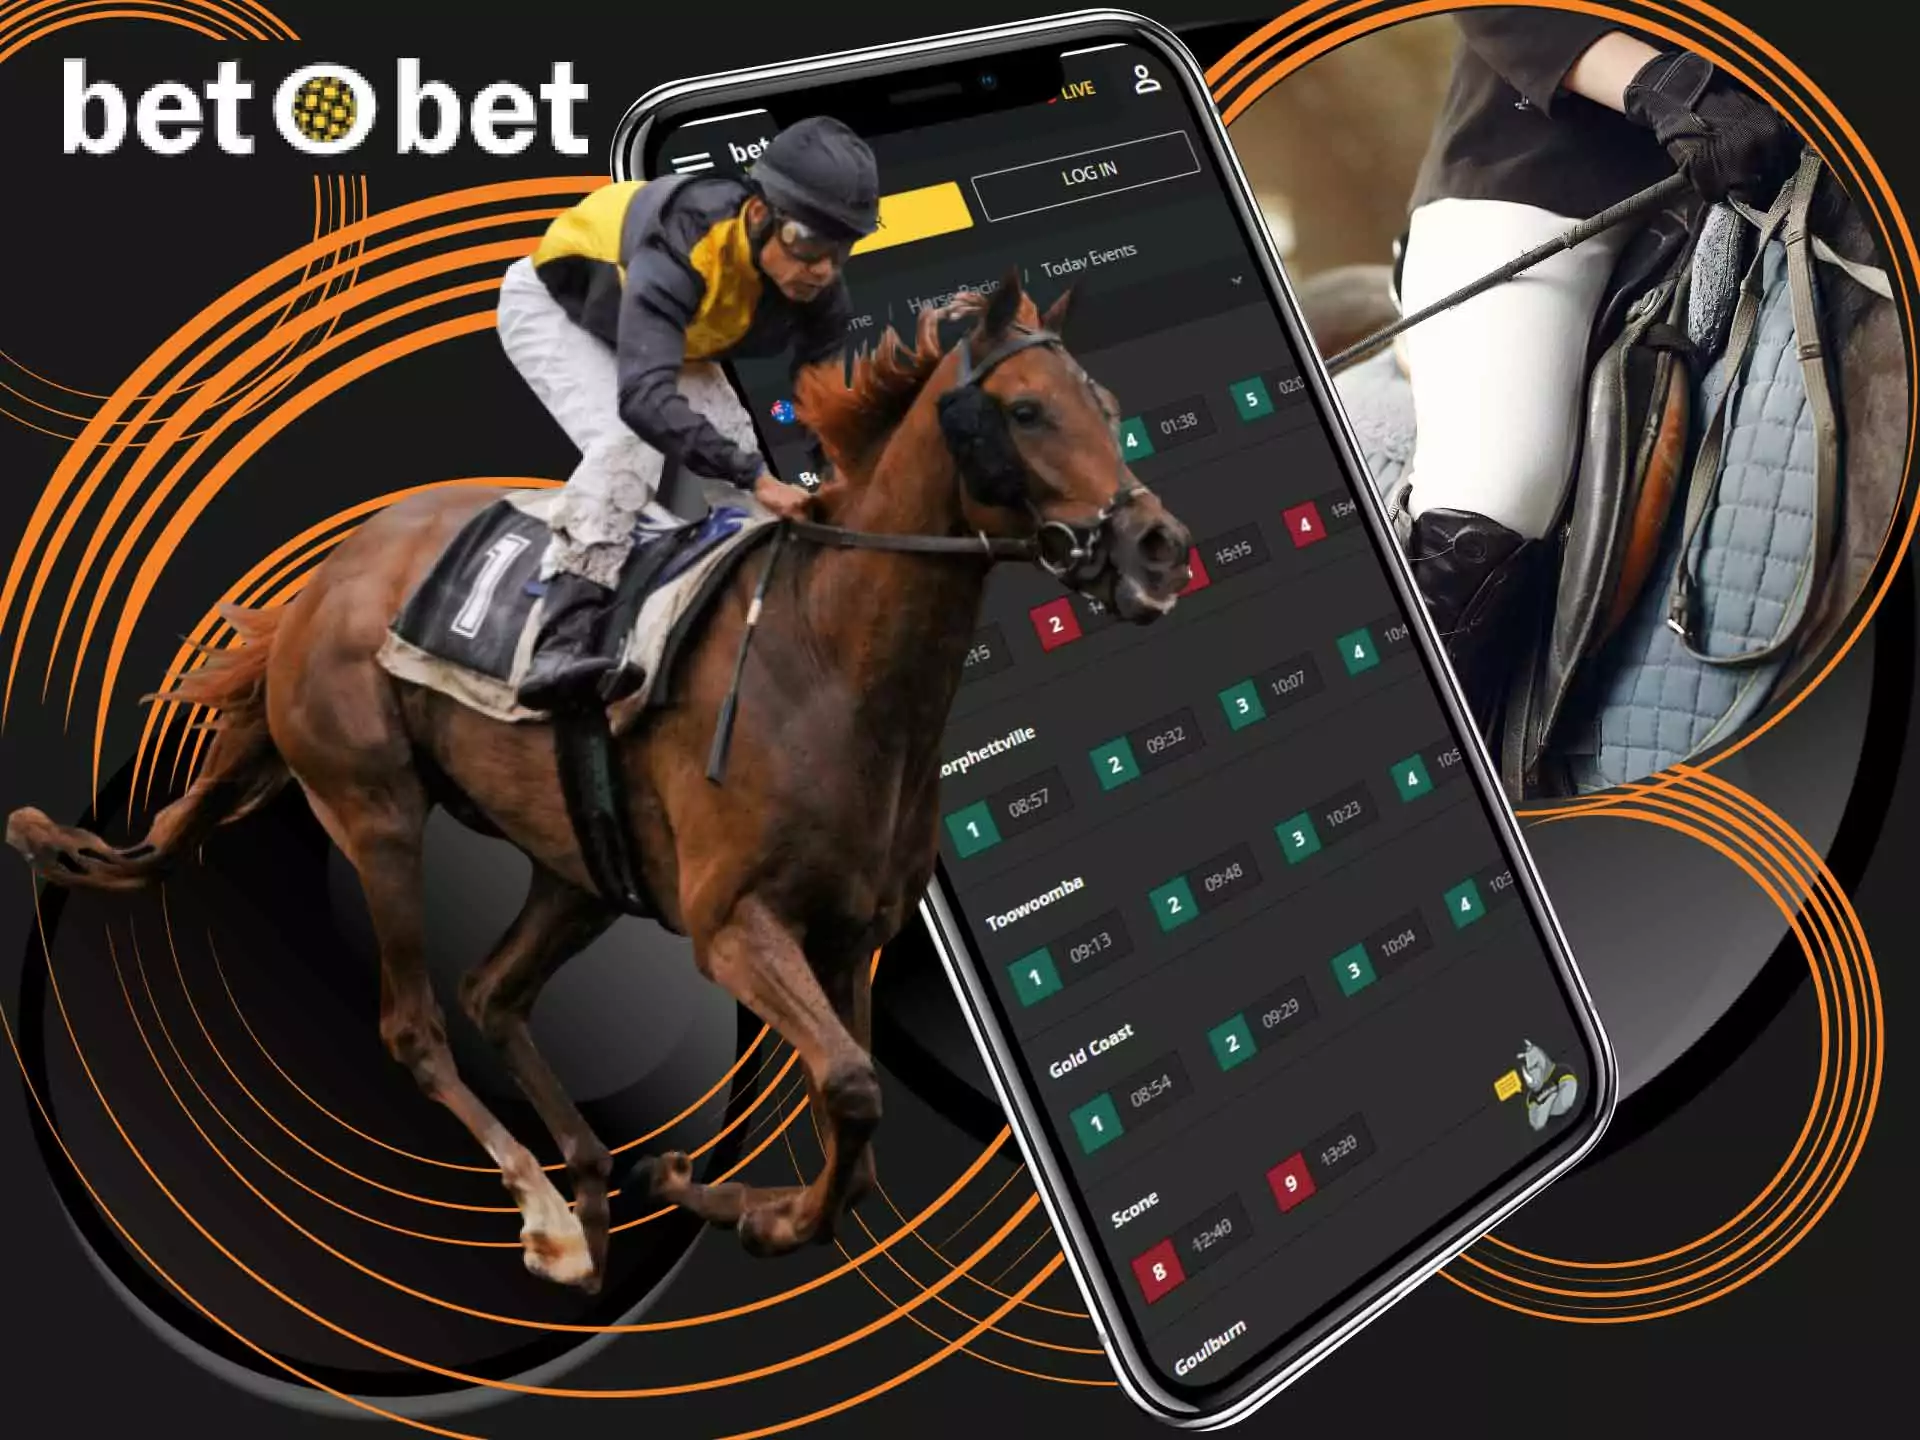 There is also horse racing among the betting options at BetOBet.